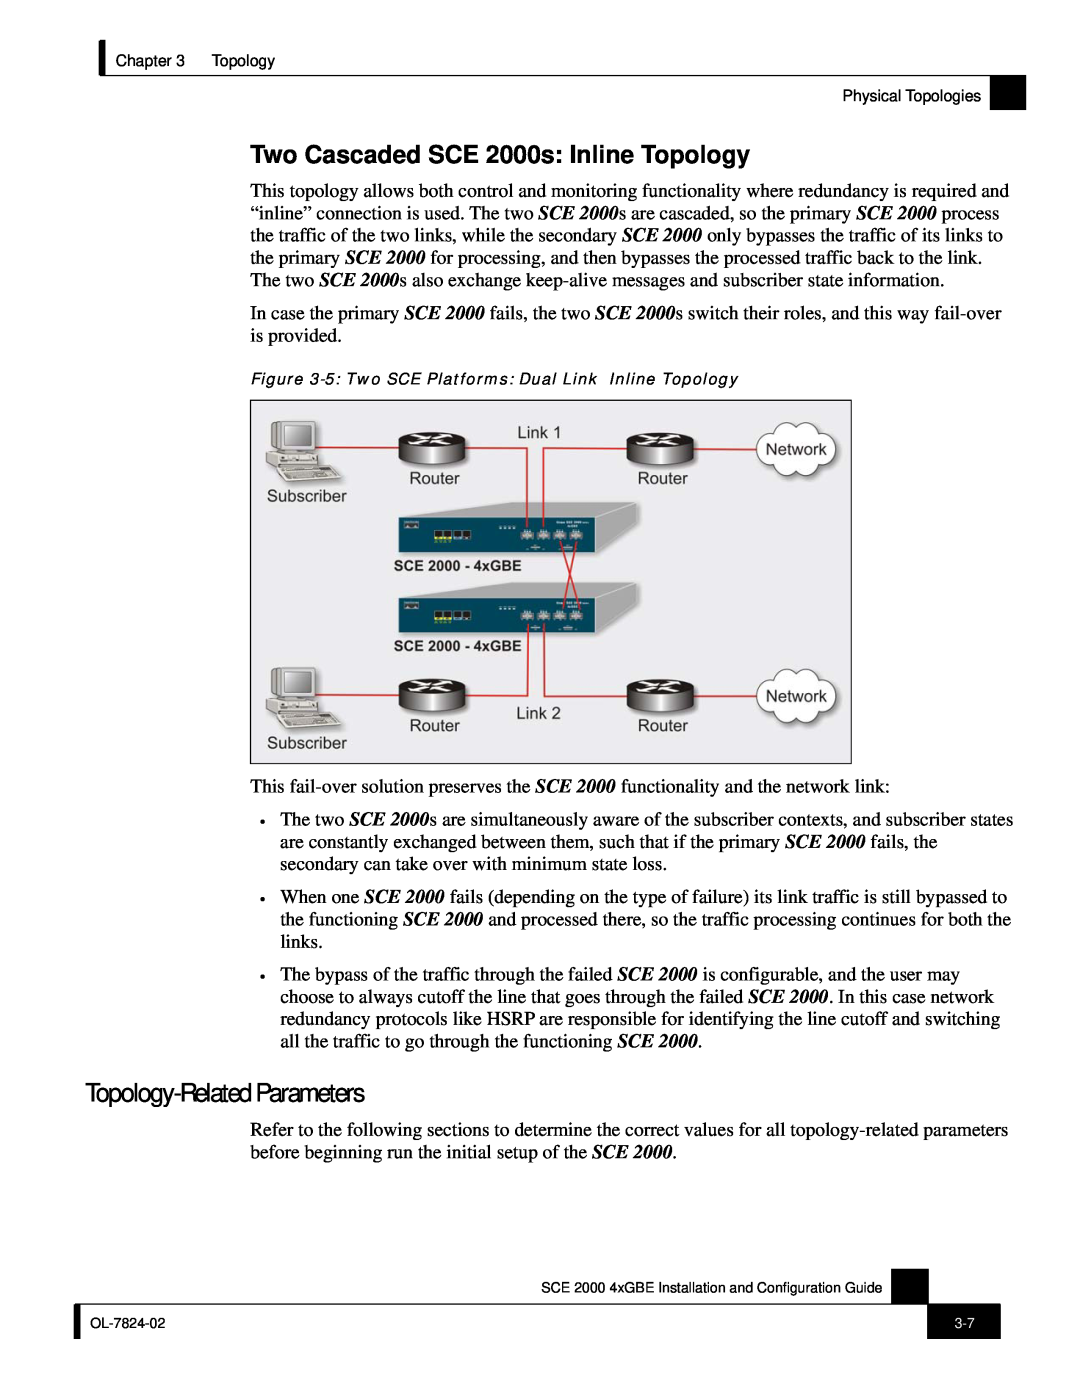 Cisco Systems SCE 2000 4xGBE manual Topology-Related Parameters, Two Cascaded SCE 2000s Inline Topology 